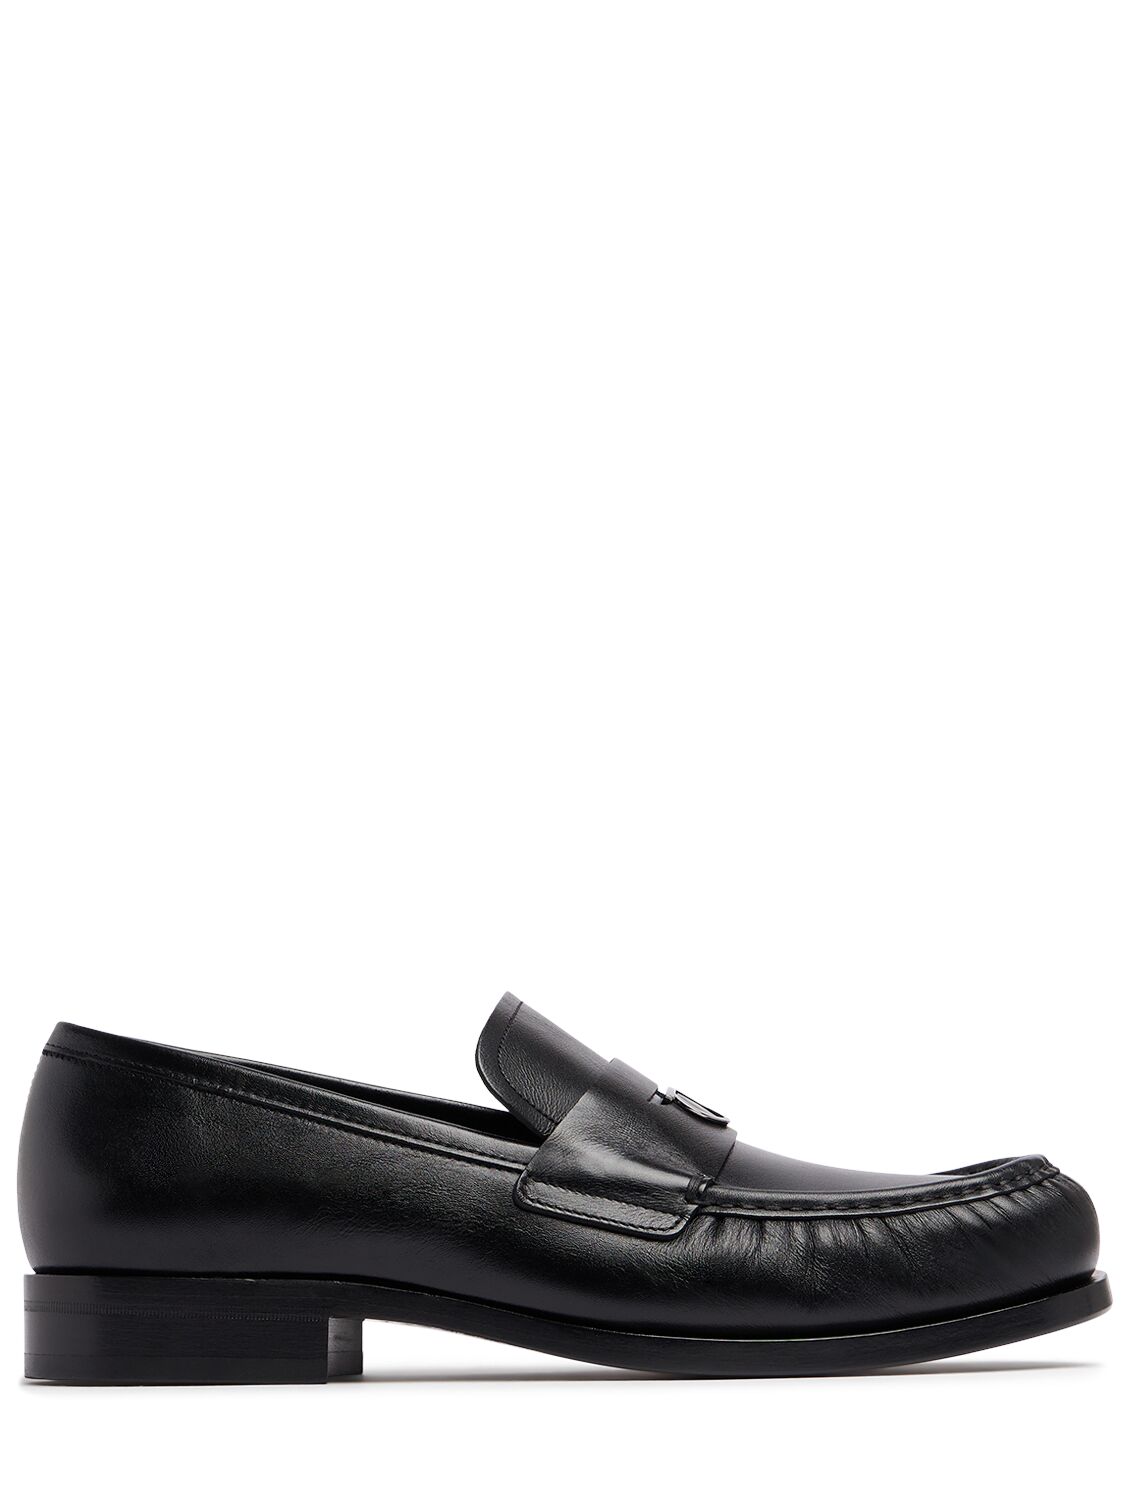 Ferragamo Delmo Embellished Leather Penny Loafers In Black